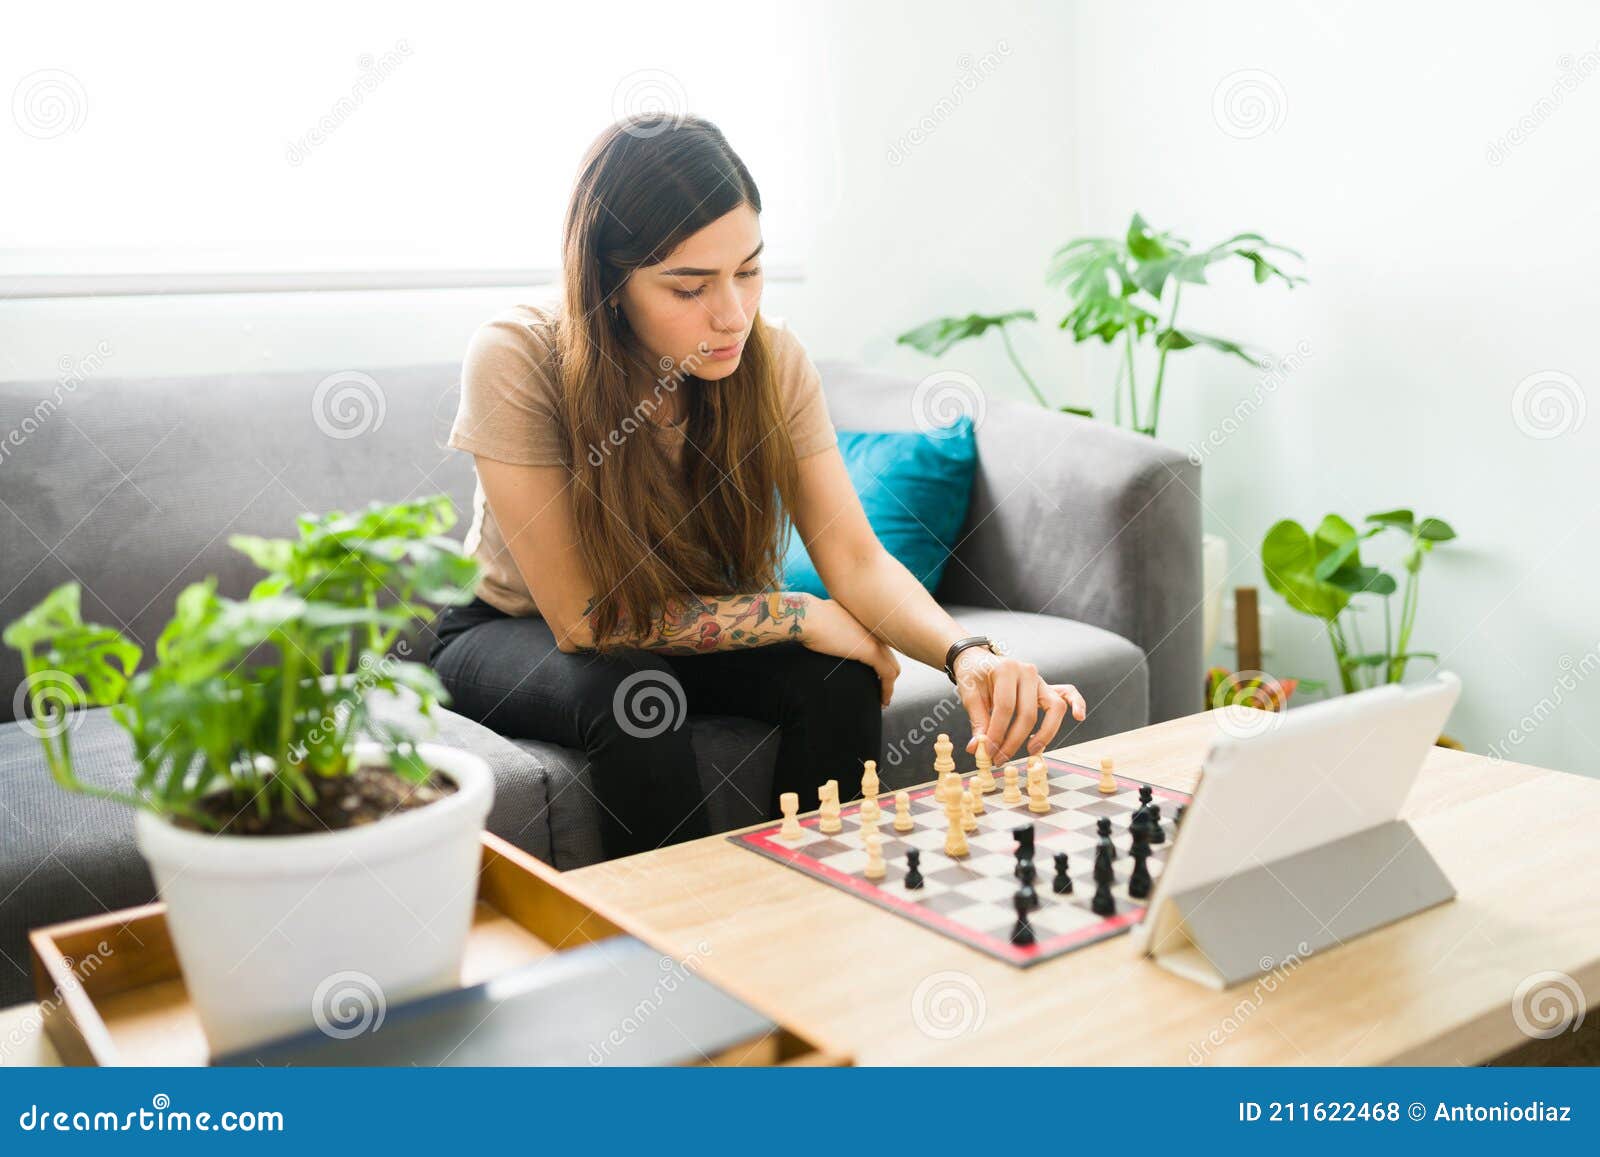 Premium Photo  Woman playing chess online uses laptop